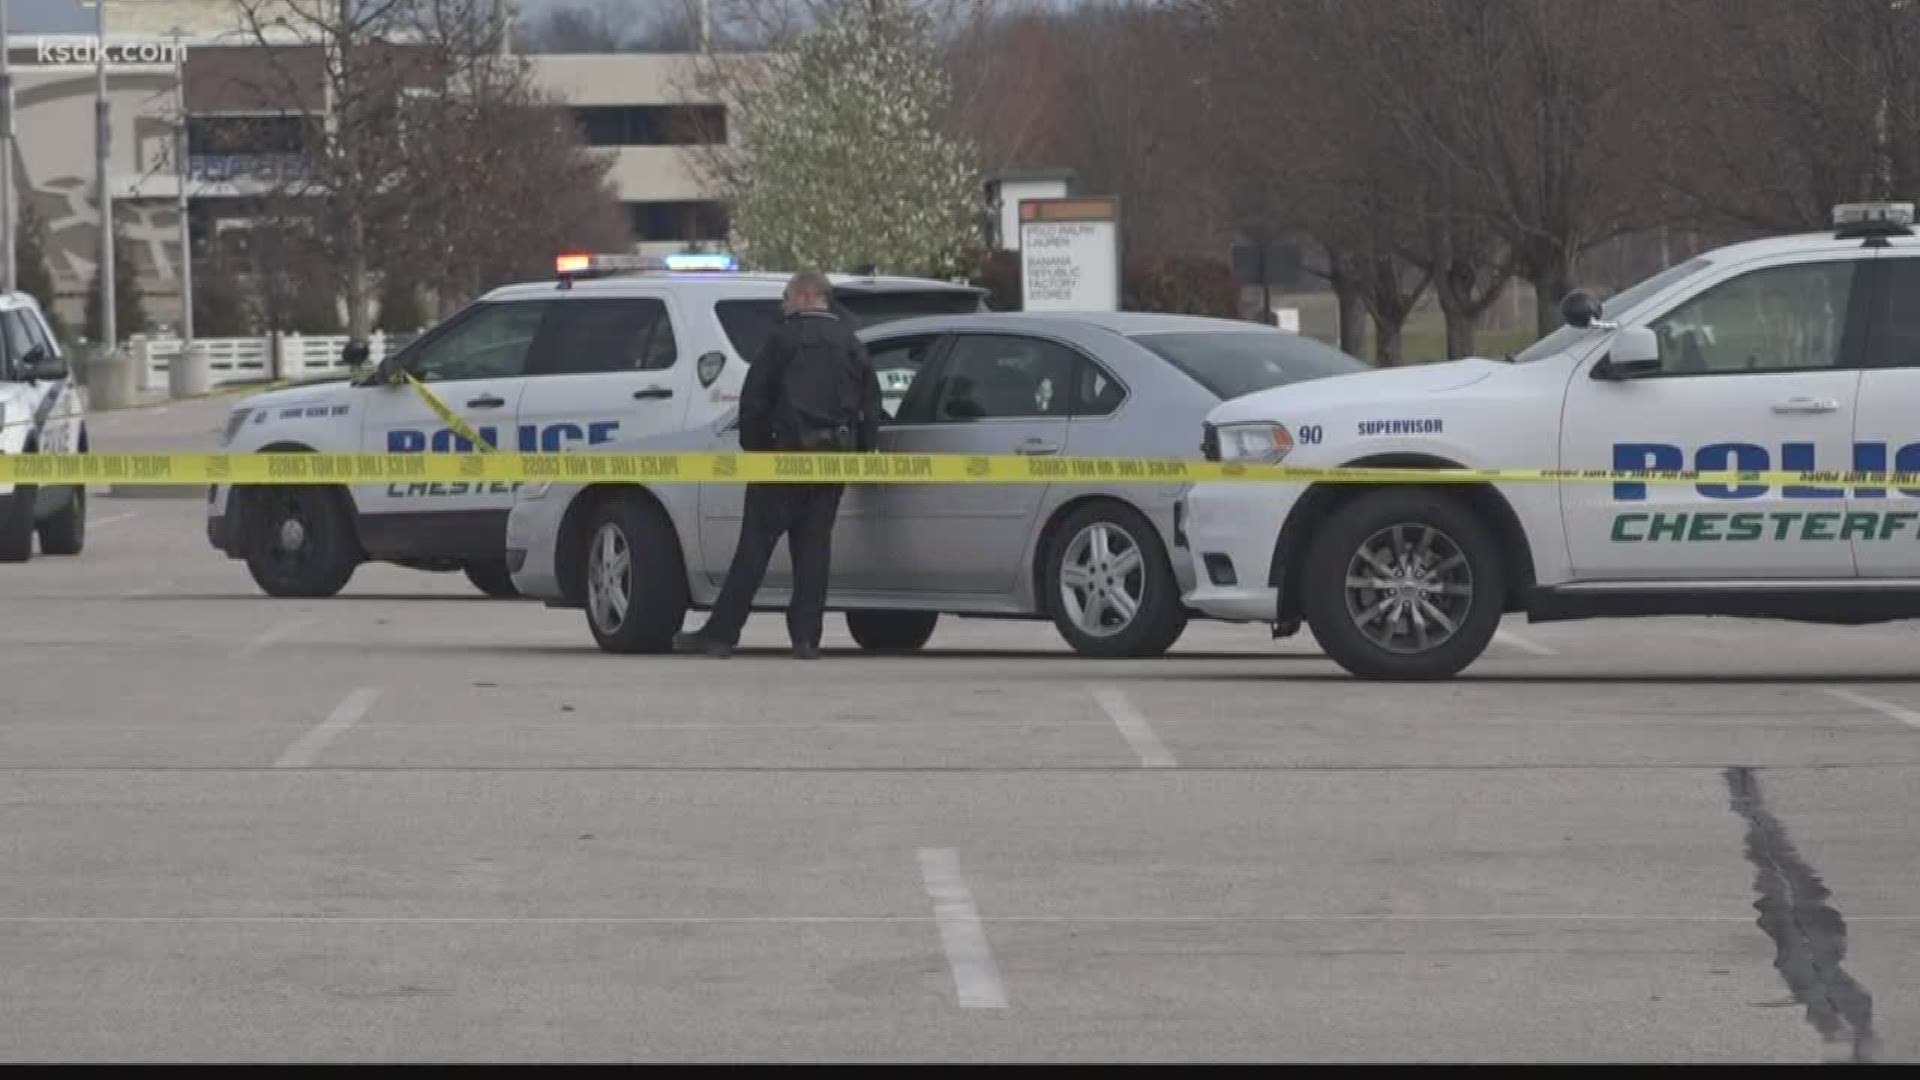 Chesterfield news: Officer-involved shooting at outlet mall | 0